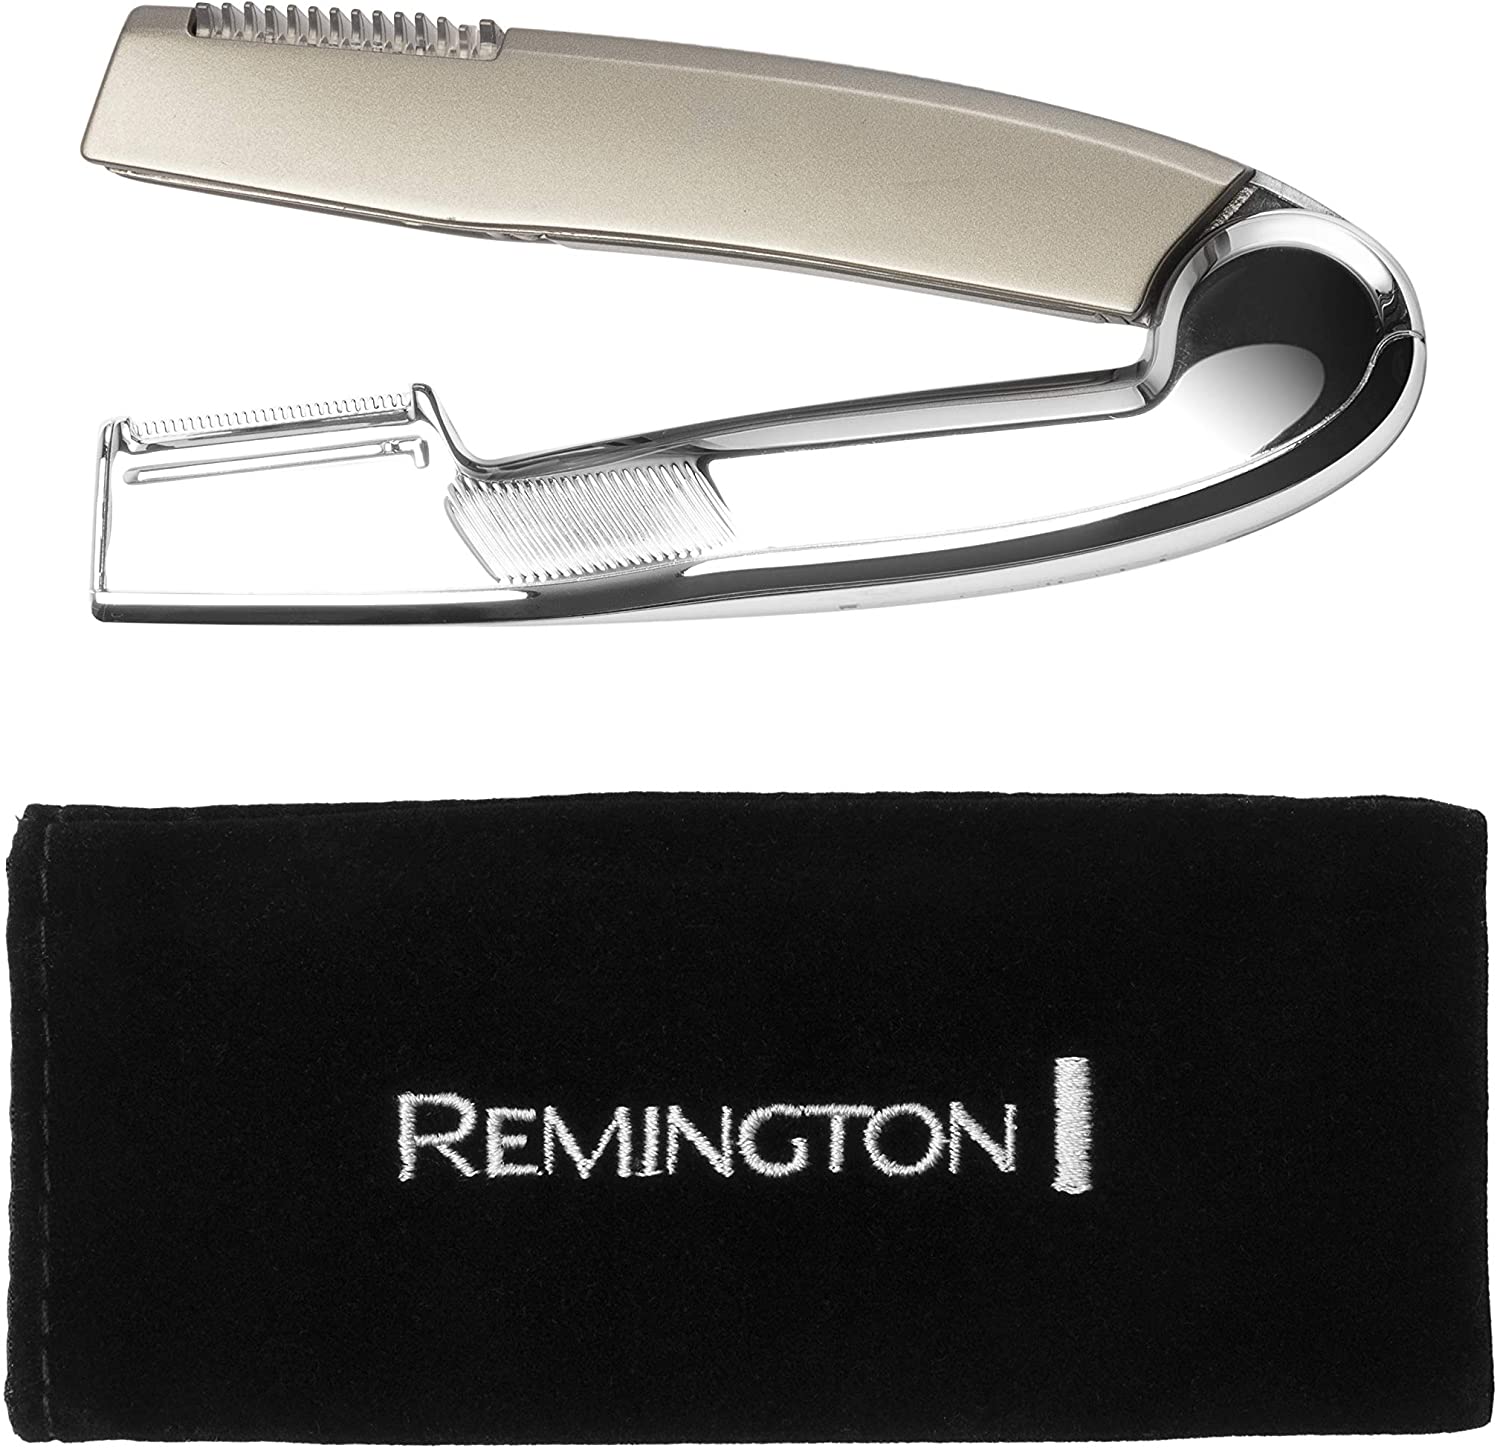 remington fold out trimmer